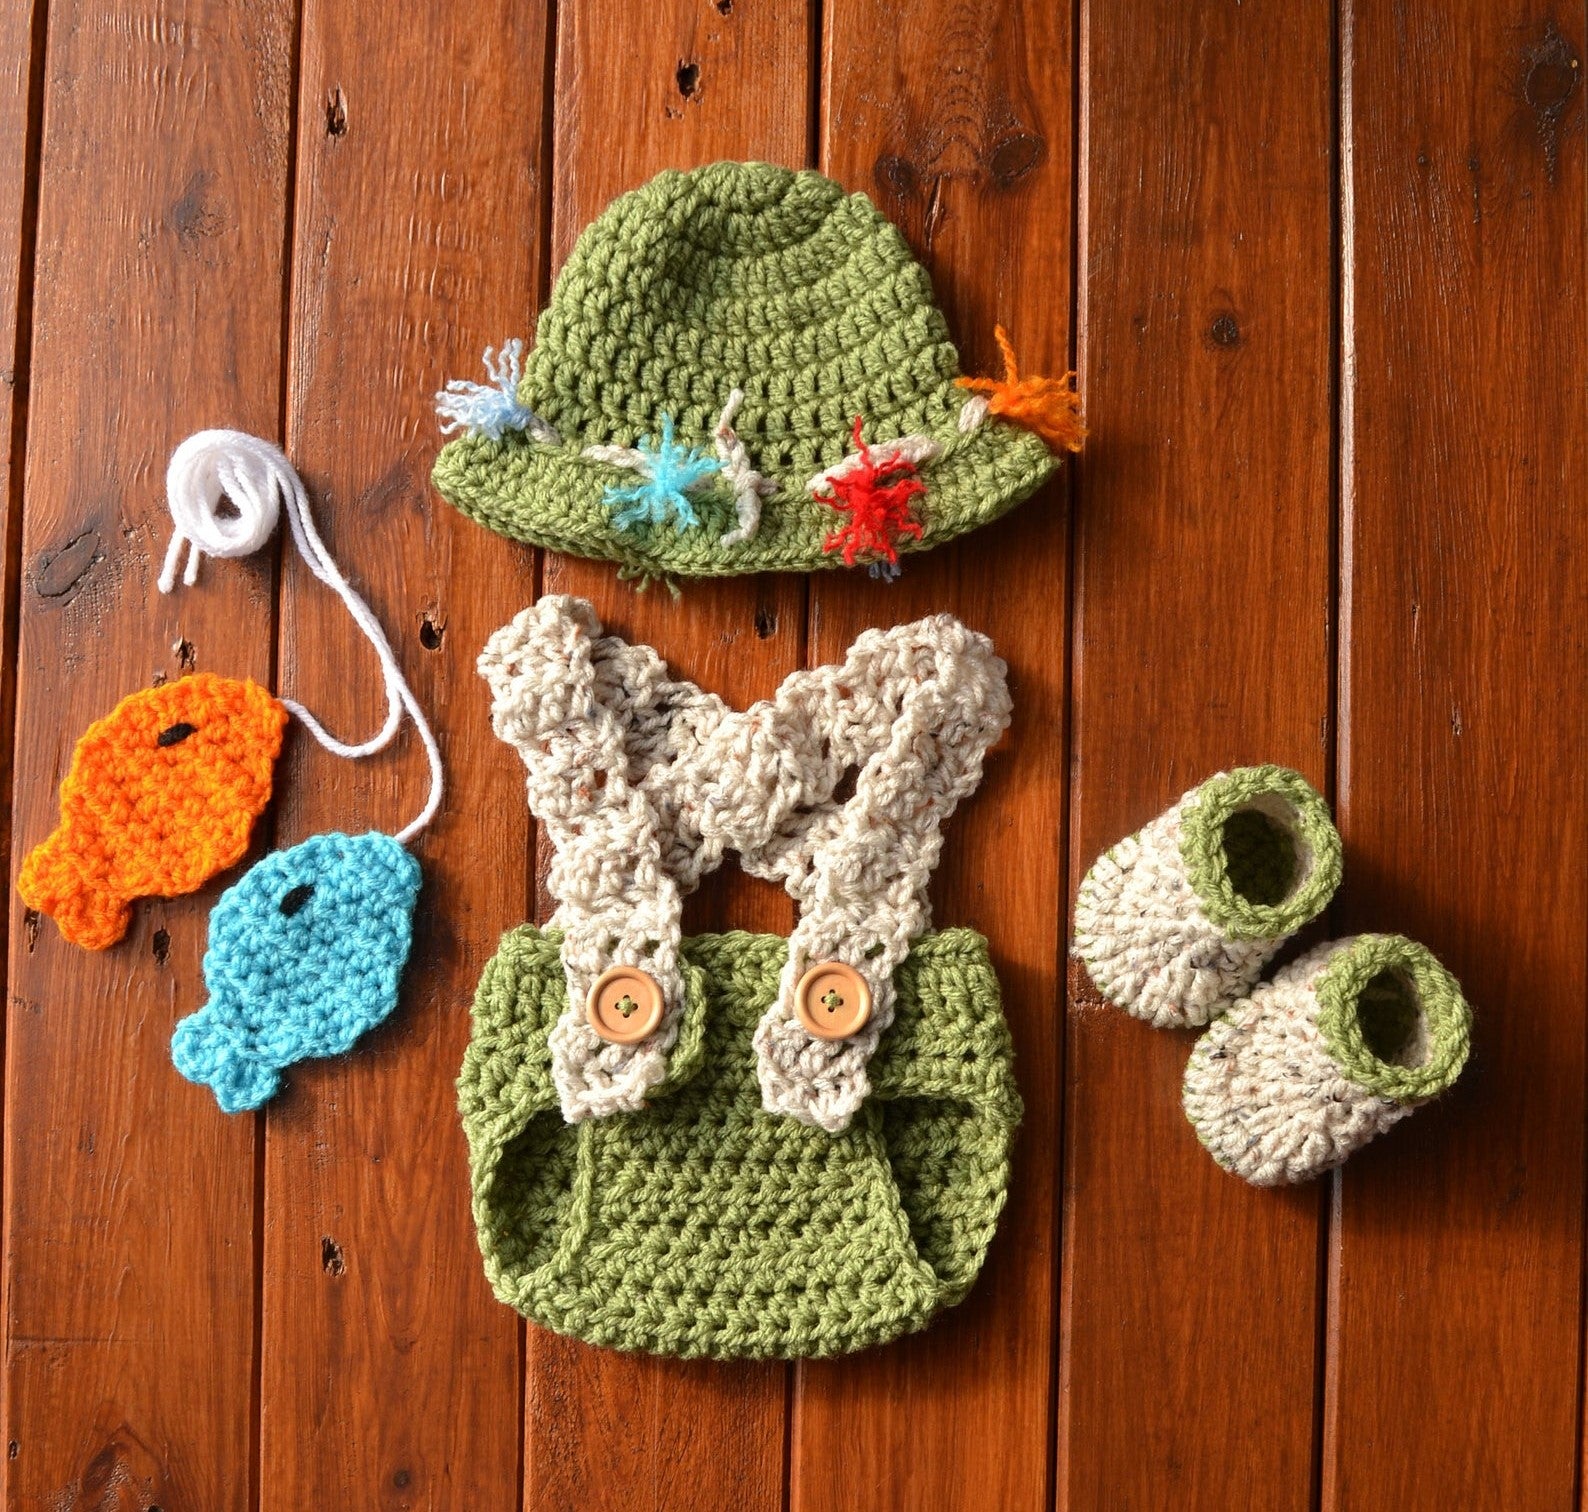 CrochetBabyProps Newborn Fishing Photo Outfit Newborn / Green/Beige / Hat+Diaper with Suspenders+2 Fish